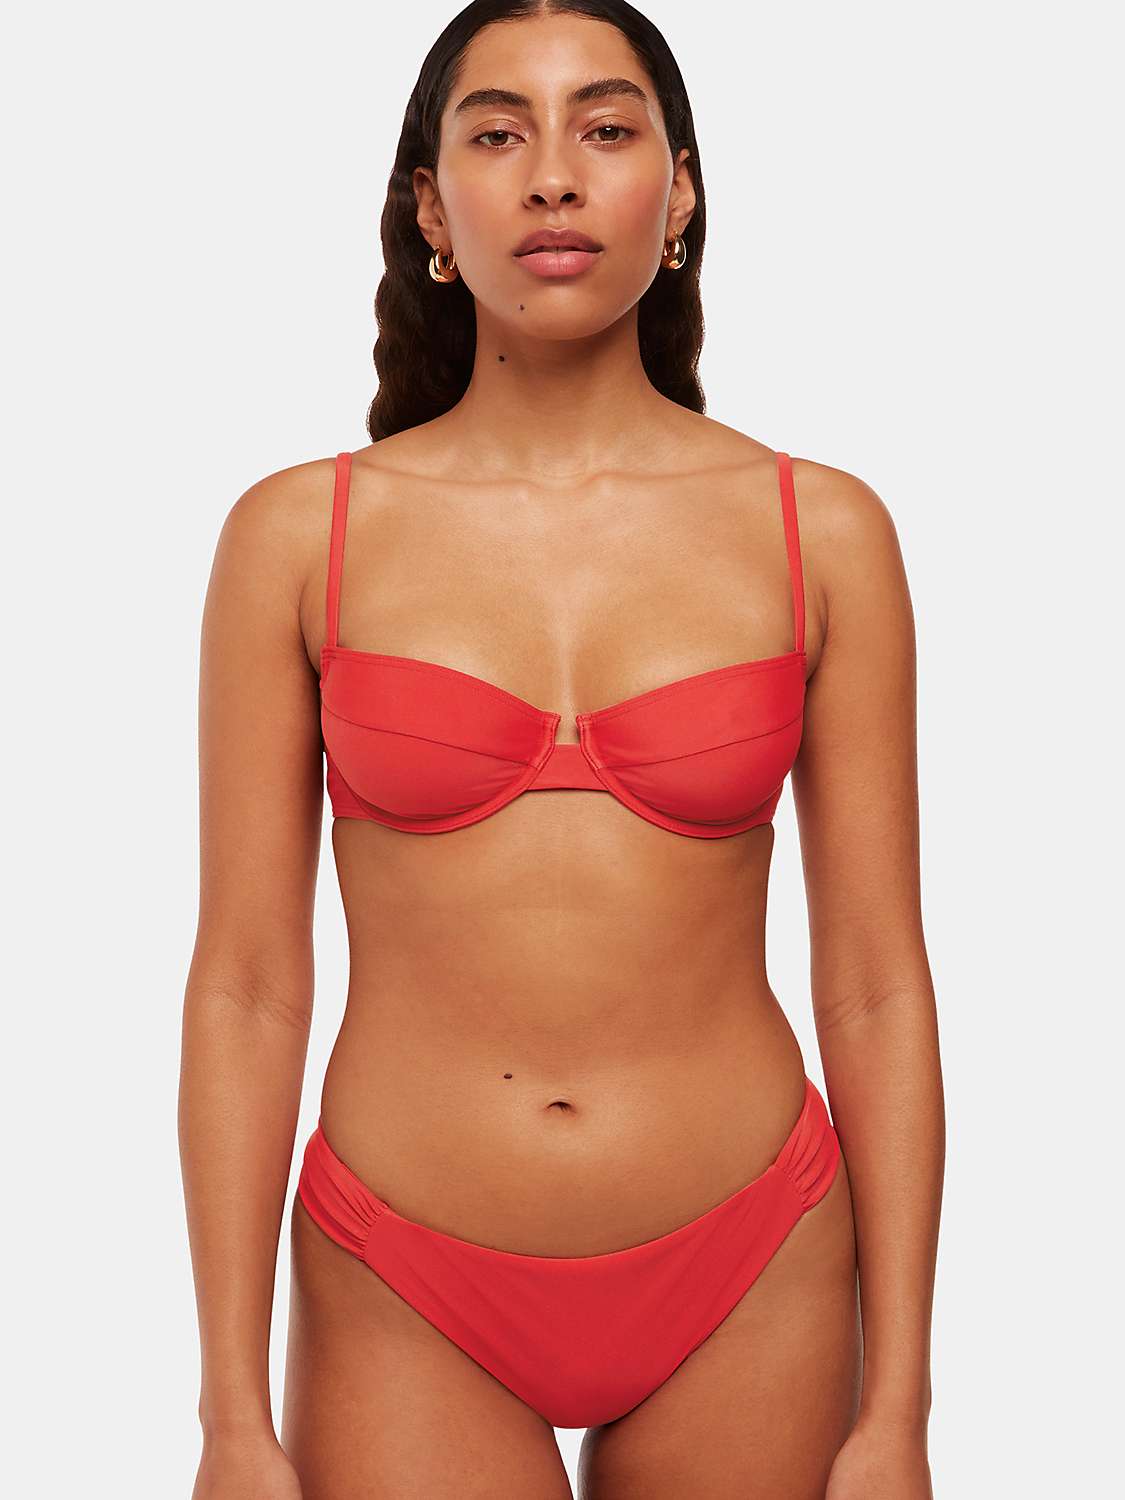 Buy Whistles Lillie Underwired Bikini Top, Red Online at johnlewis.com